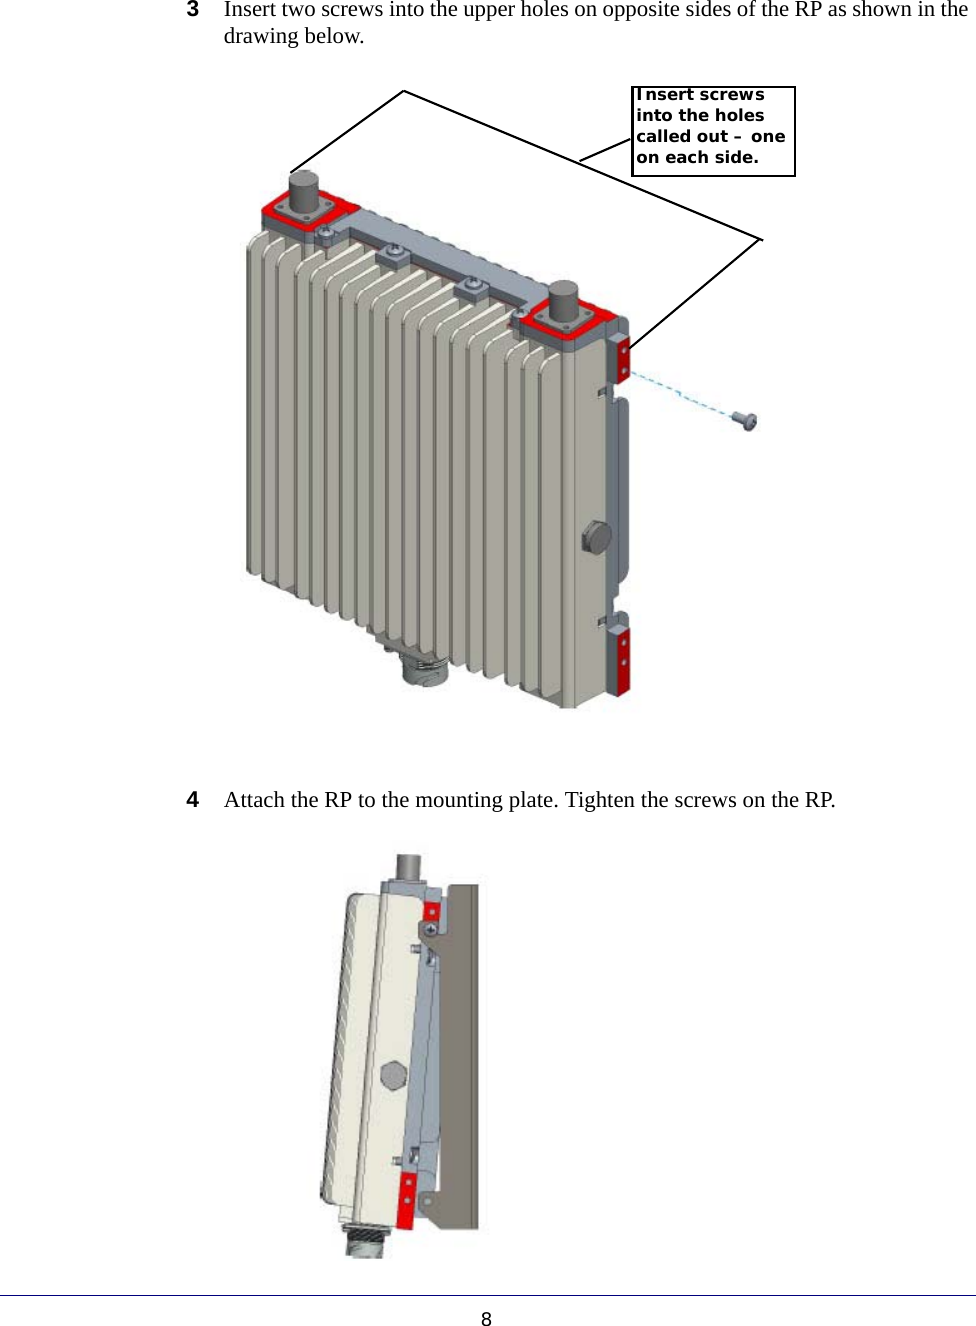 83Insert two screws into the upper holes on opposite sides of the RP as shown in the drawing below. 4Attach the RP to the mounting plate. Tighten the screws on the RP. Insert screws into the holes called out – one on each side. 